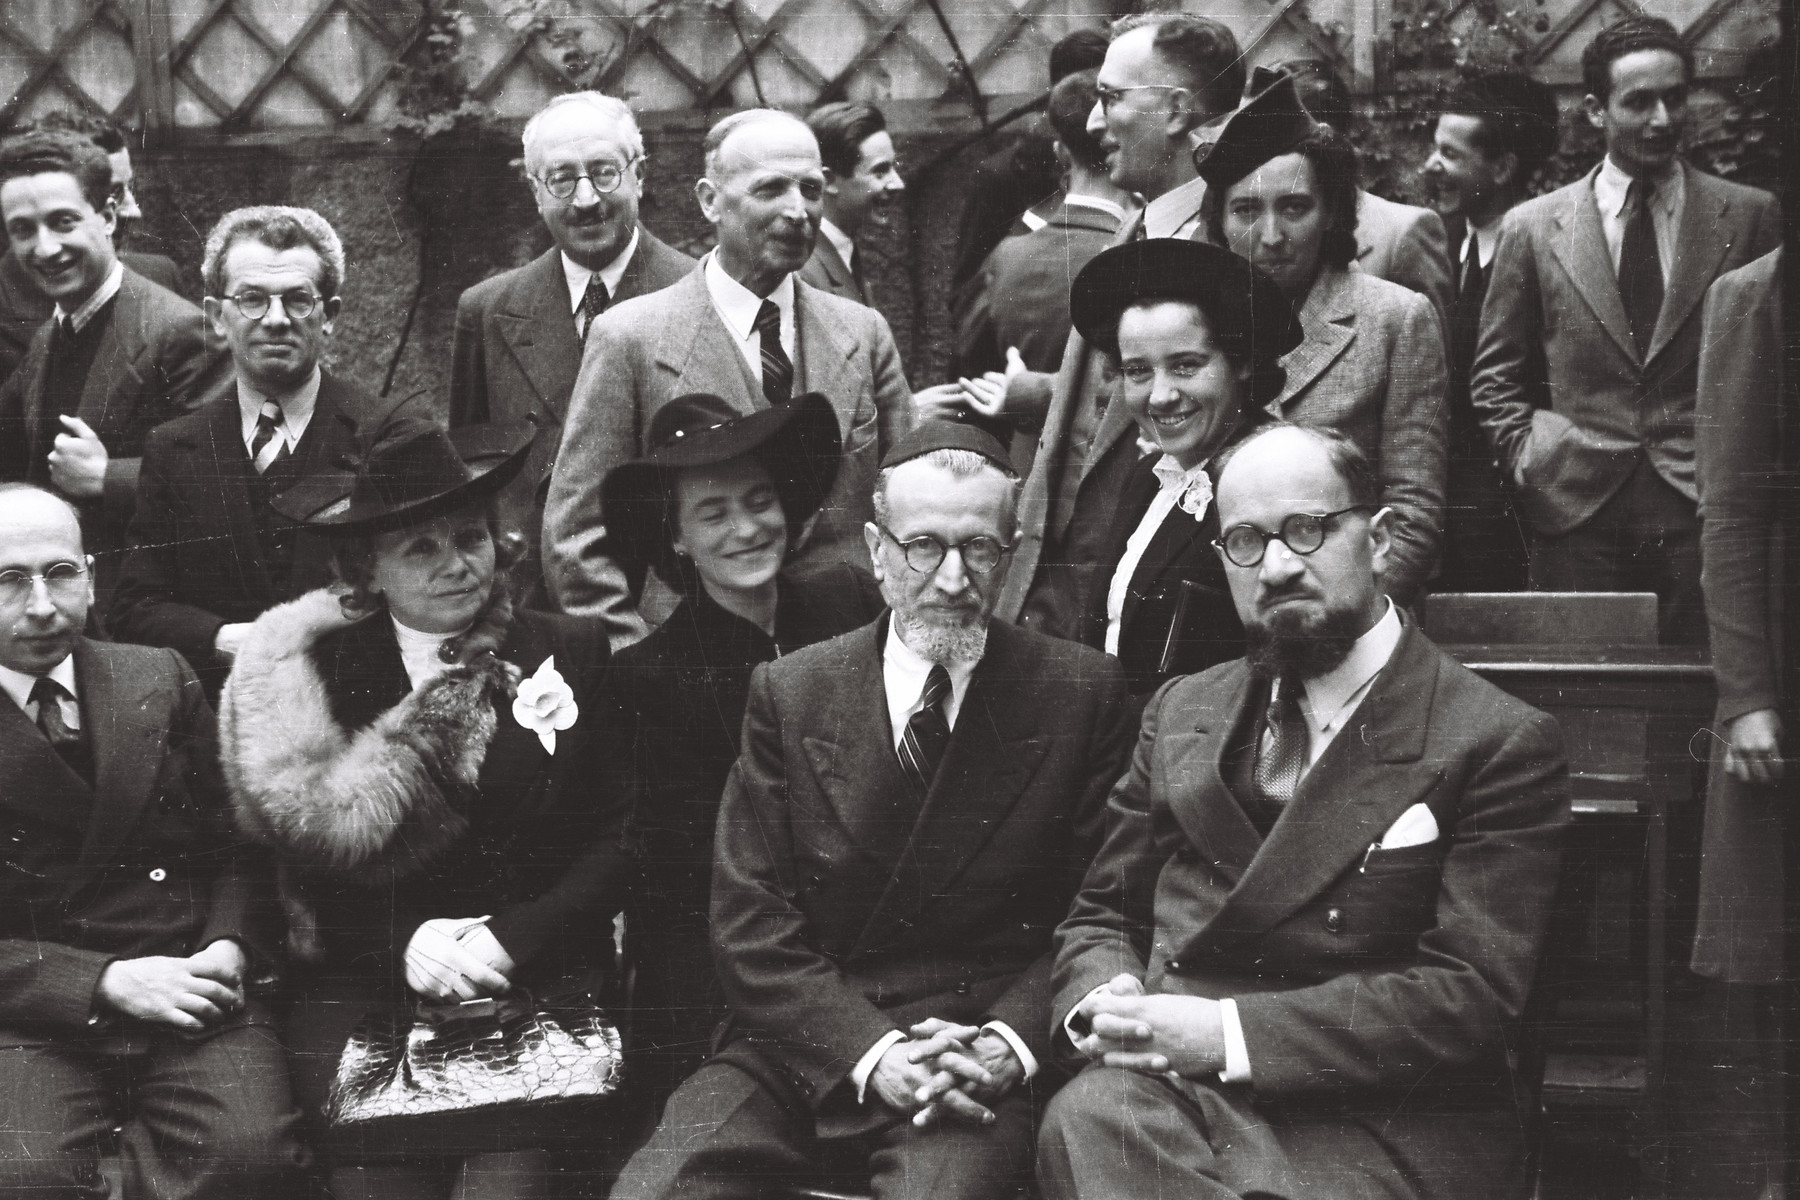 Group portrait of the faculty of the Jewish school in Milan, La Scuolo via Eupili.

Seated in the center is Rabbi Gustavo Castelbolognesi, chief-rabbi of Milan.  Alda Perugla is to his left and Prof. Columbo is seated to his right.  Hulda Cassuto (math teacher) is behind them and in-between Rabbi Castelbolognesi and Prof. Columbo.  Dr. Norsa, professor of philosophy is seated on the left and behind him is Professor Tedeschi.  Prof. Dreyfus is seated second from the left.